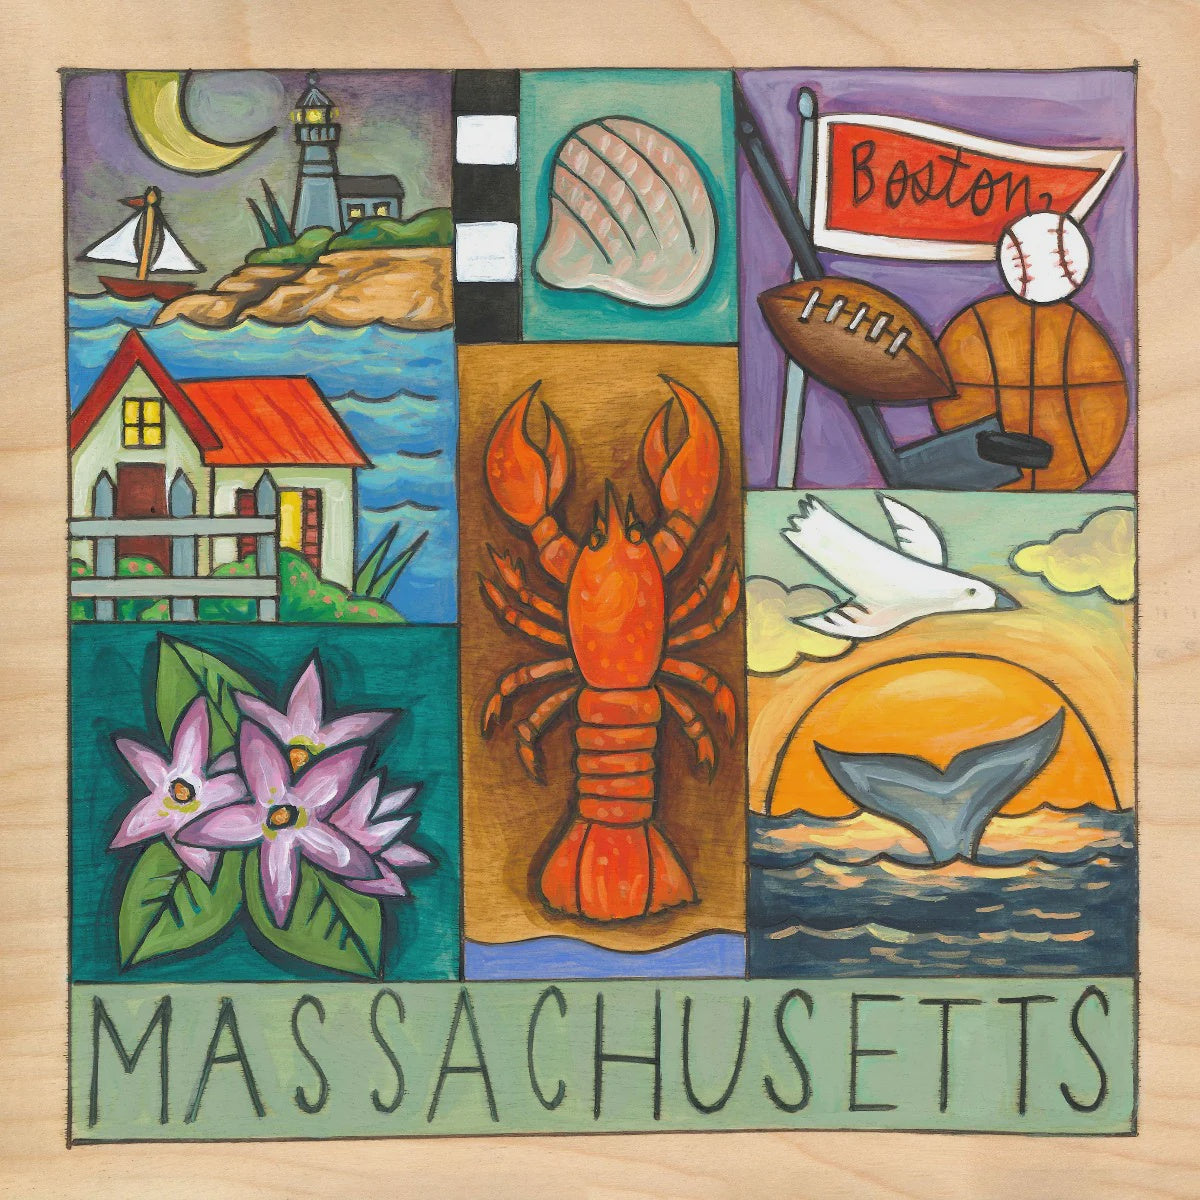 Massachusetts Plaque-The Bay State